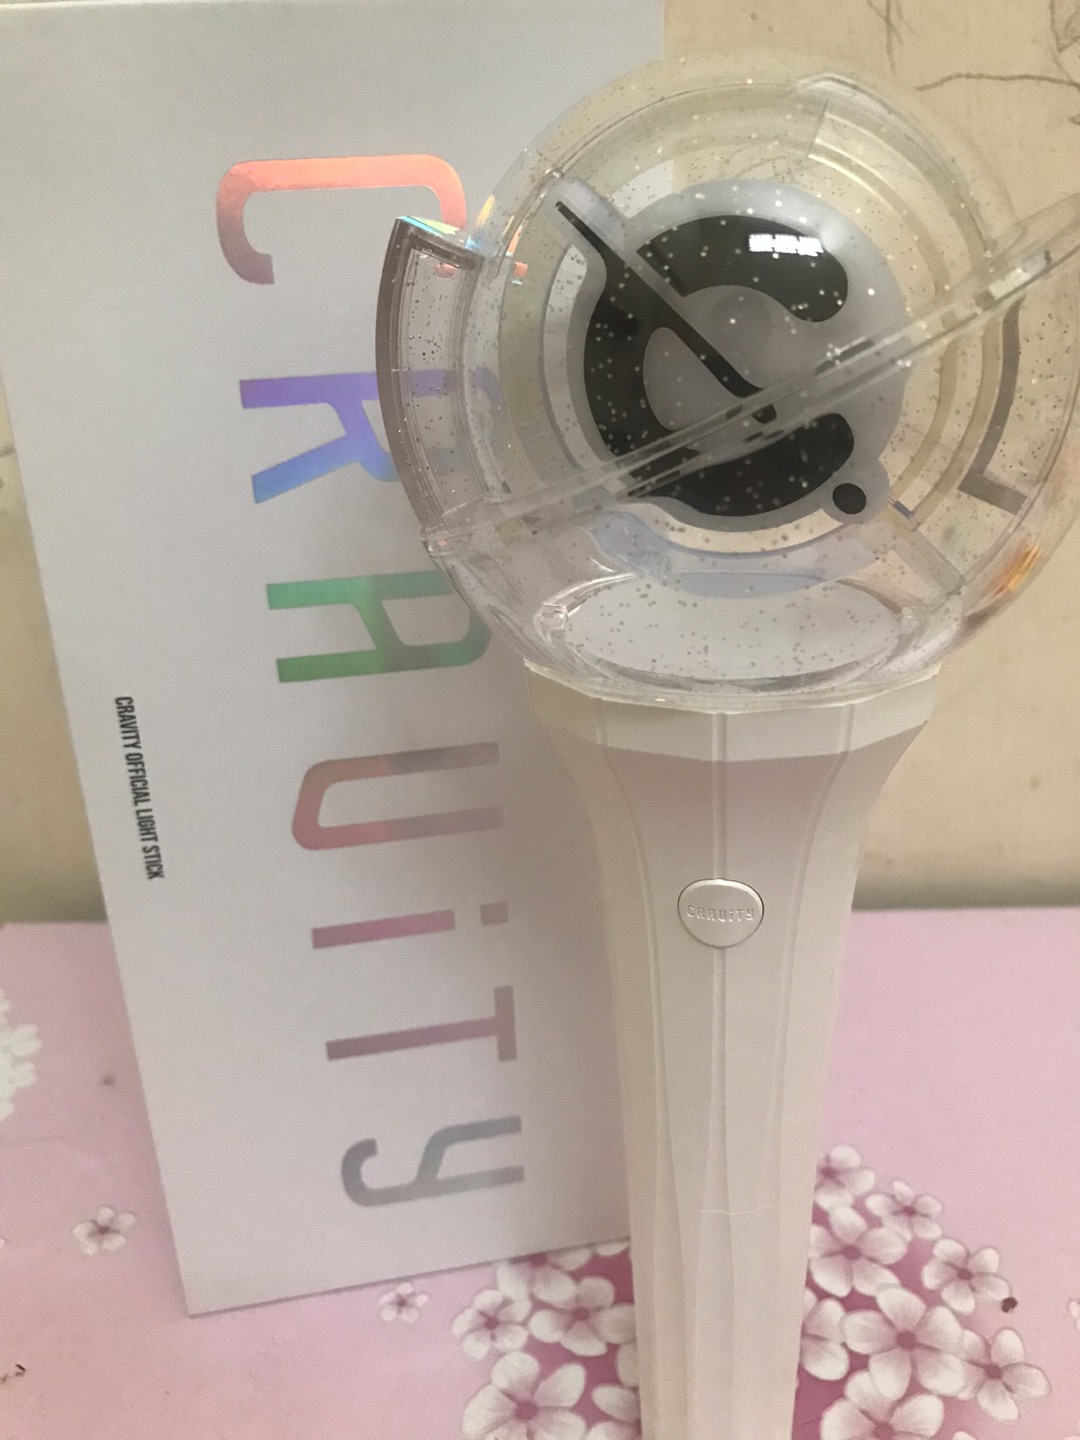 Lightstick cravity CRAVITY Official